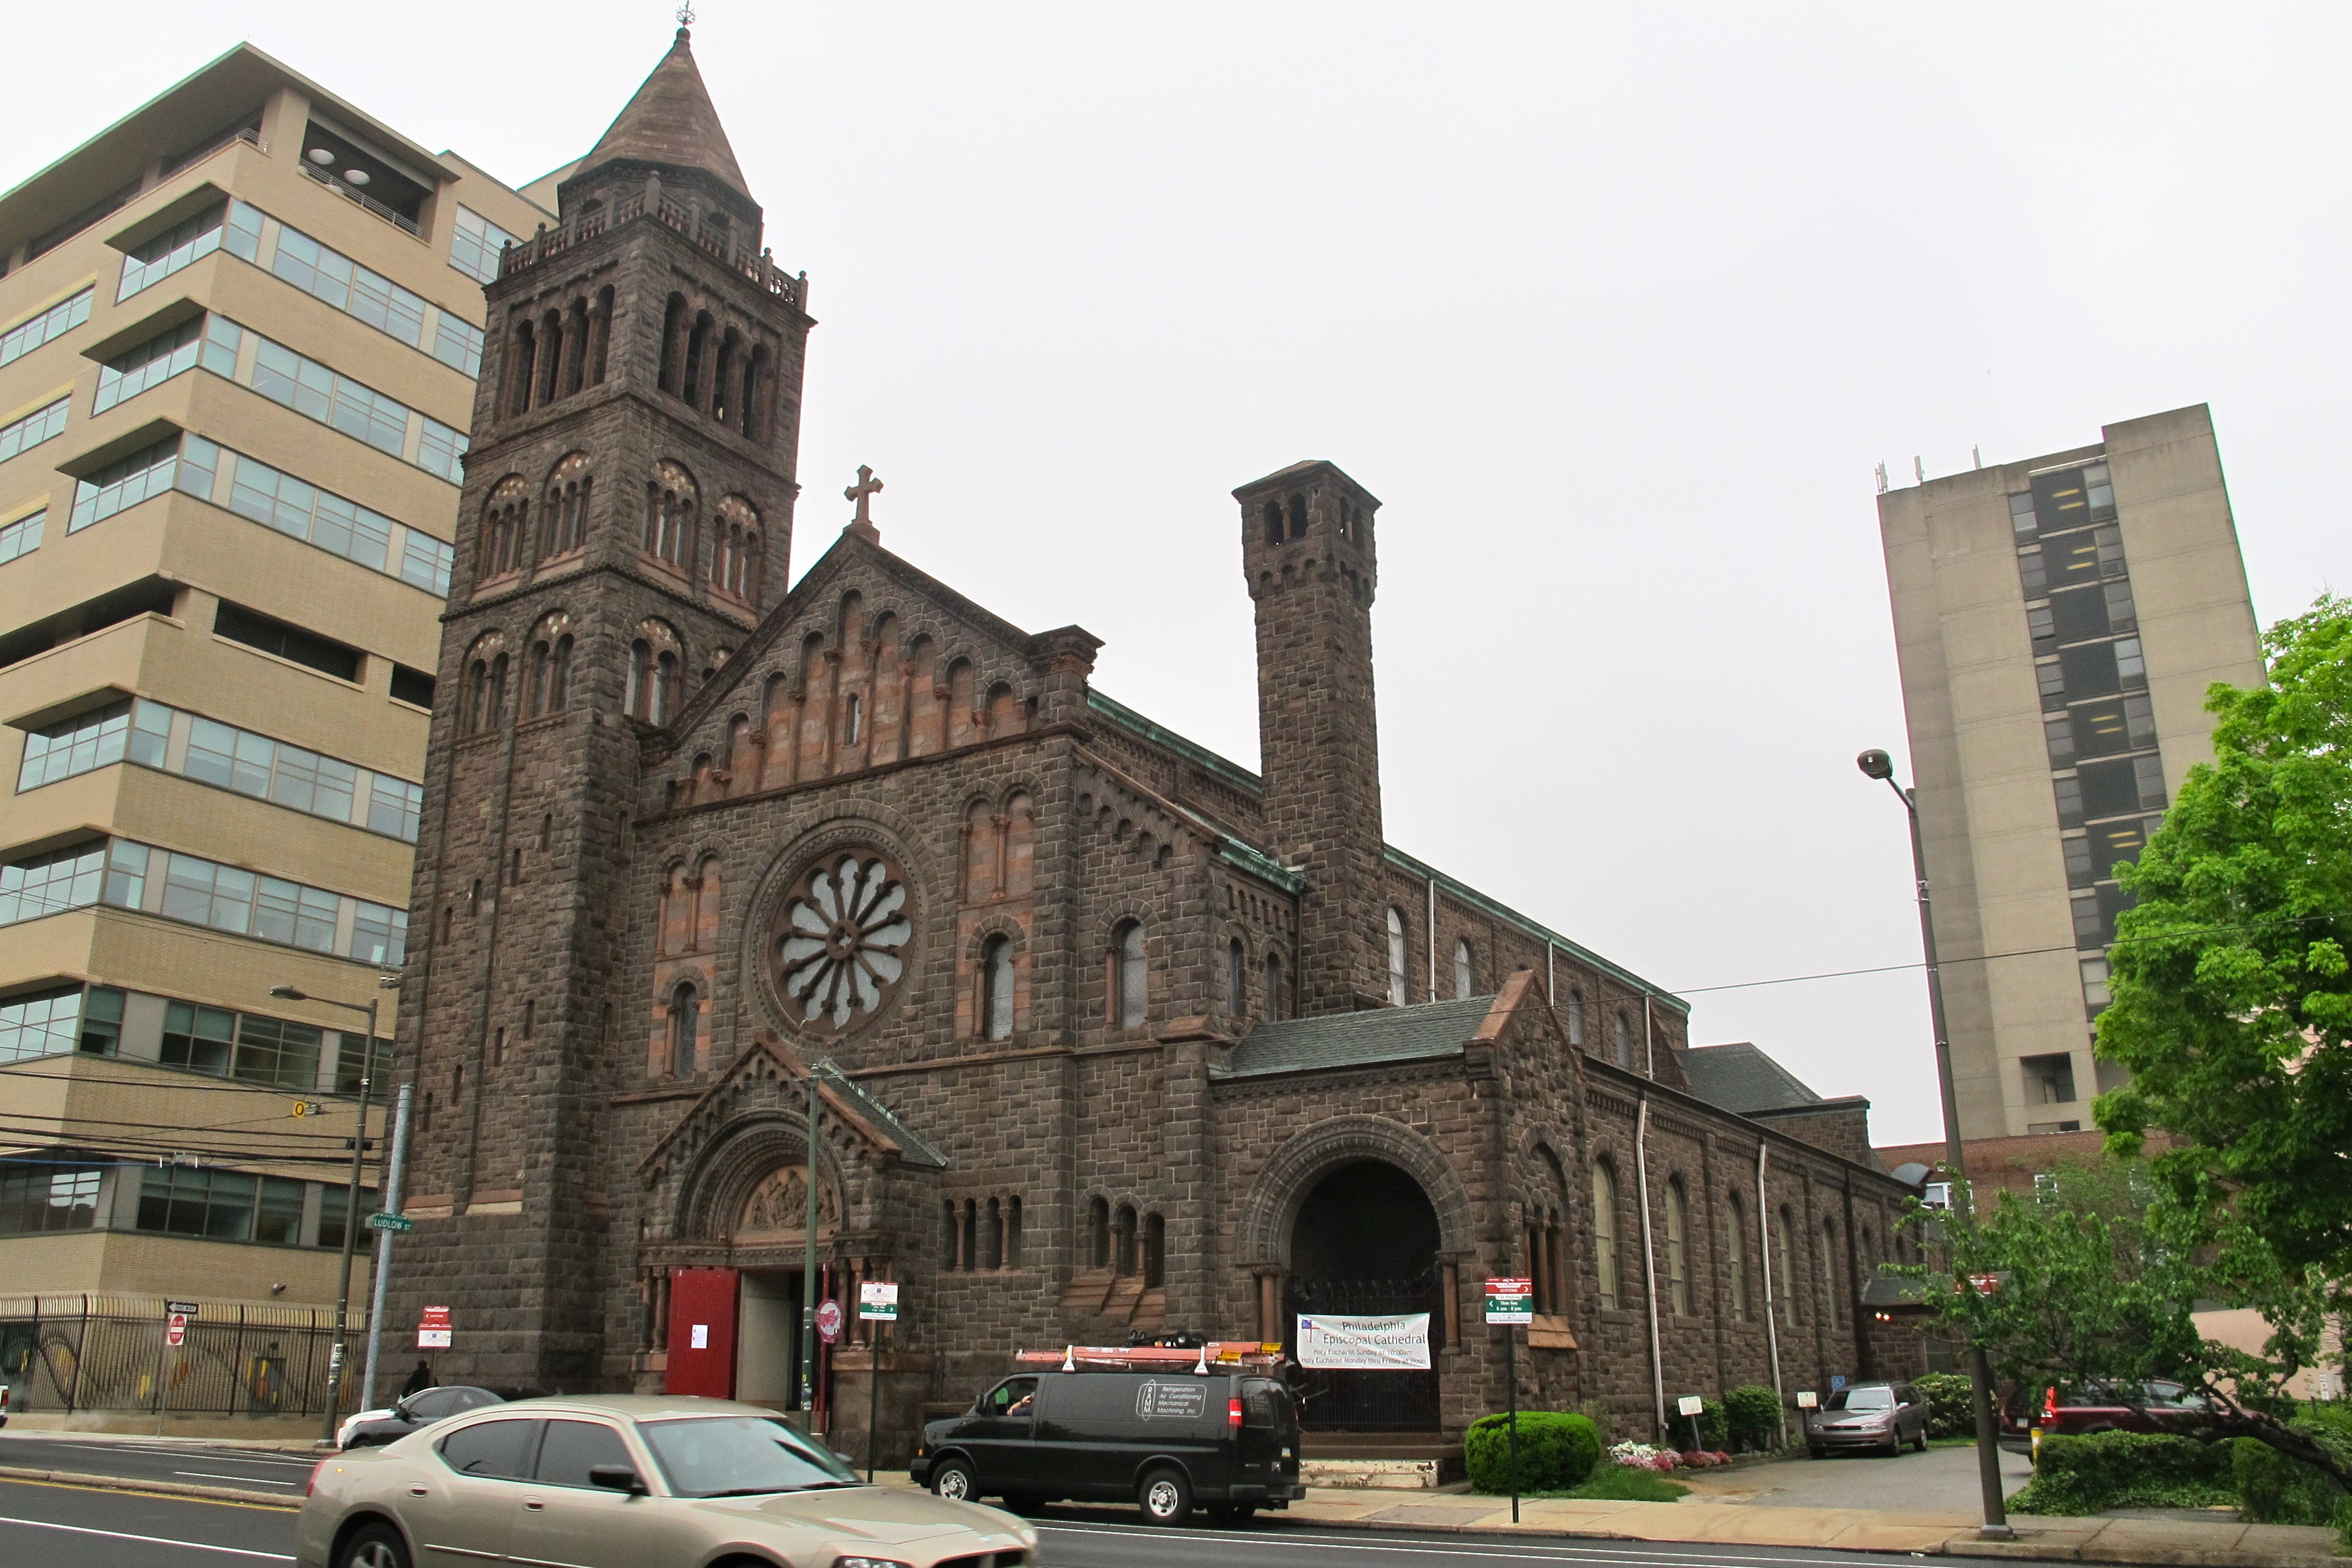 The Episcopal Cathedral could get a 25-story tower built on its campus at 38th and Chestnut.